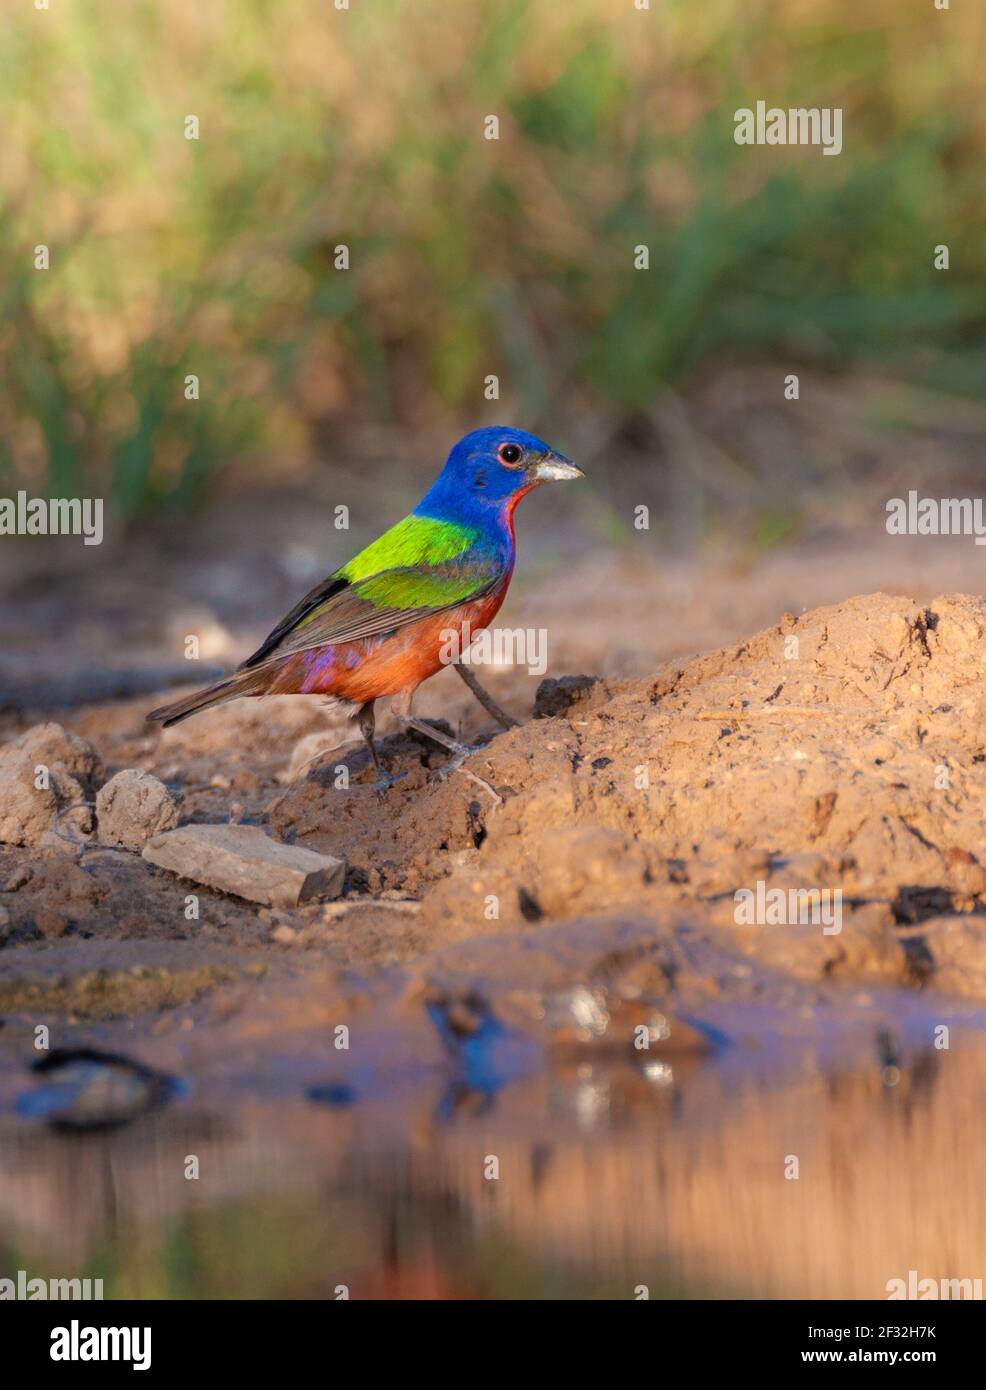 Painted Bunting, Passerina ciris, amazingly colorful bird, looking for water and relief from summer heat, on a ranch in South Texas. Stock Photo